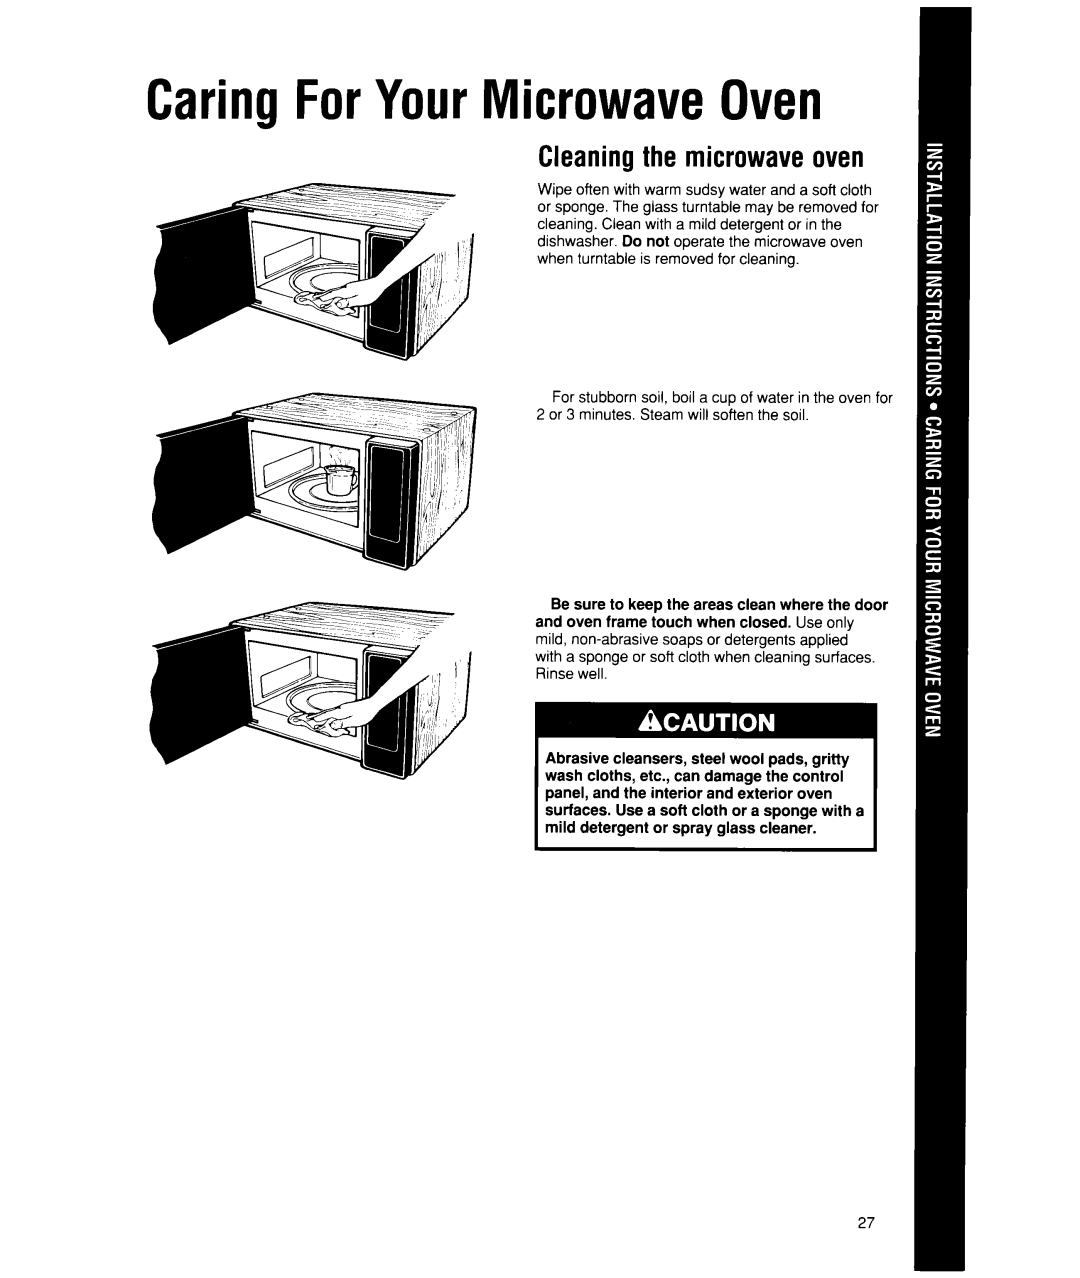 Whirlpool MW7400XW manual CaringForYourMicrowaveOven, Cleaning the microwave oven 